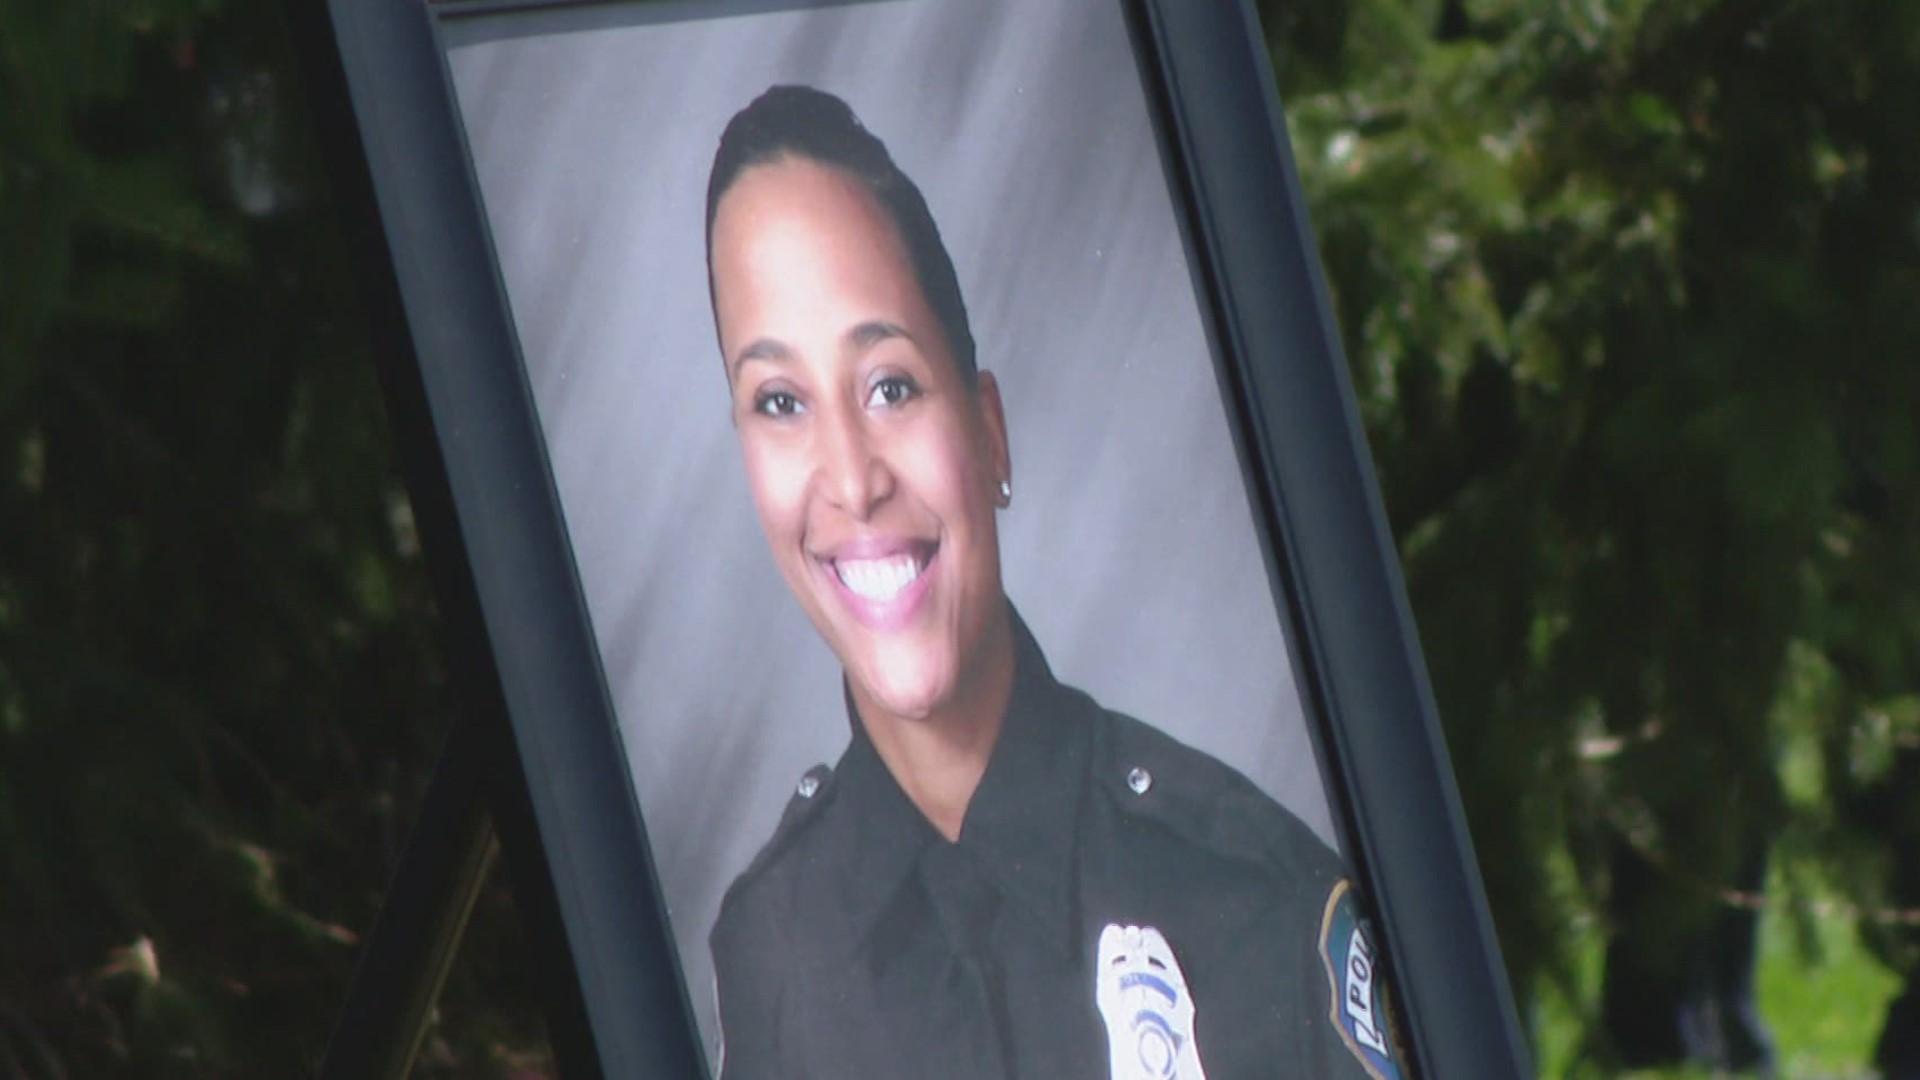 One of the officers who was honored during the service was IMPD's Breann Leath. She was killed in the line of duty in 2020.